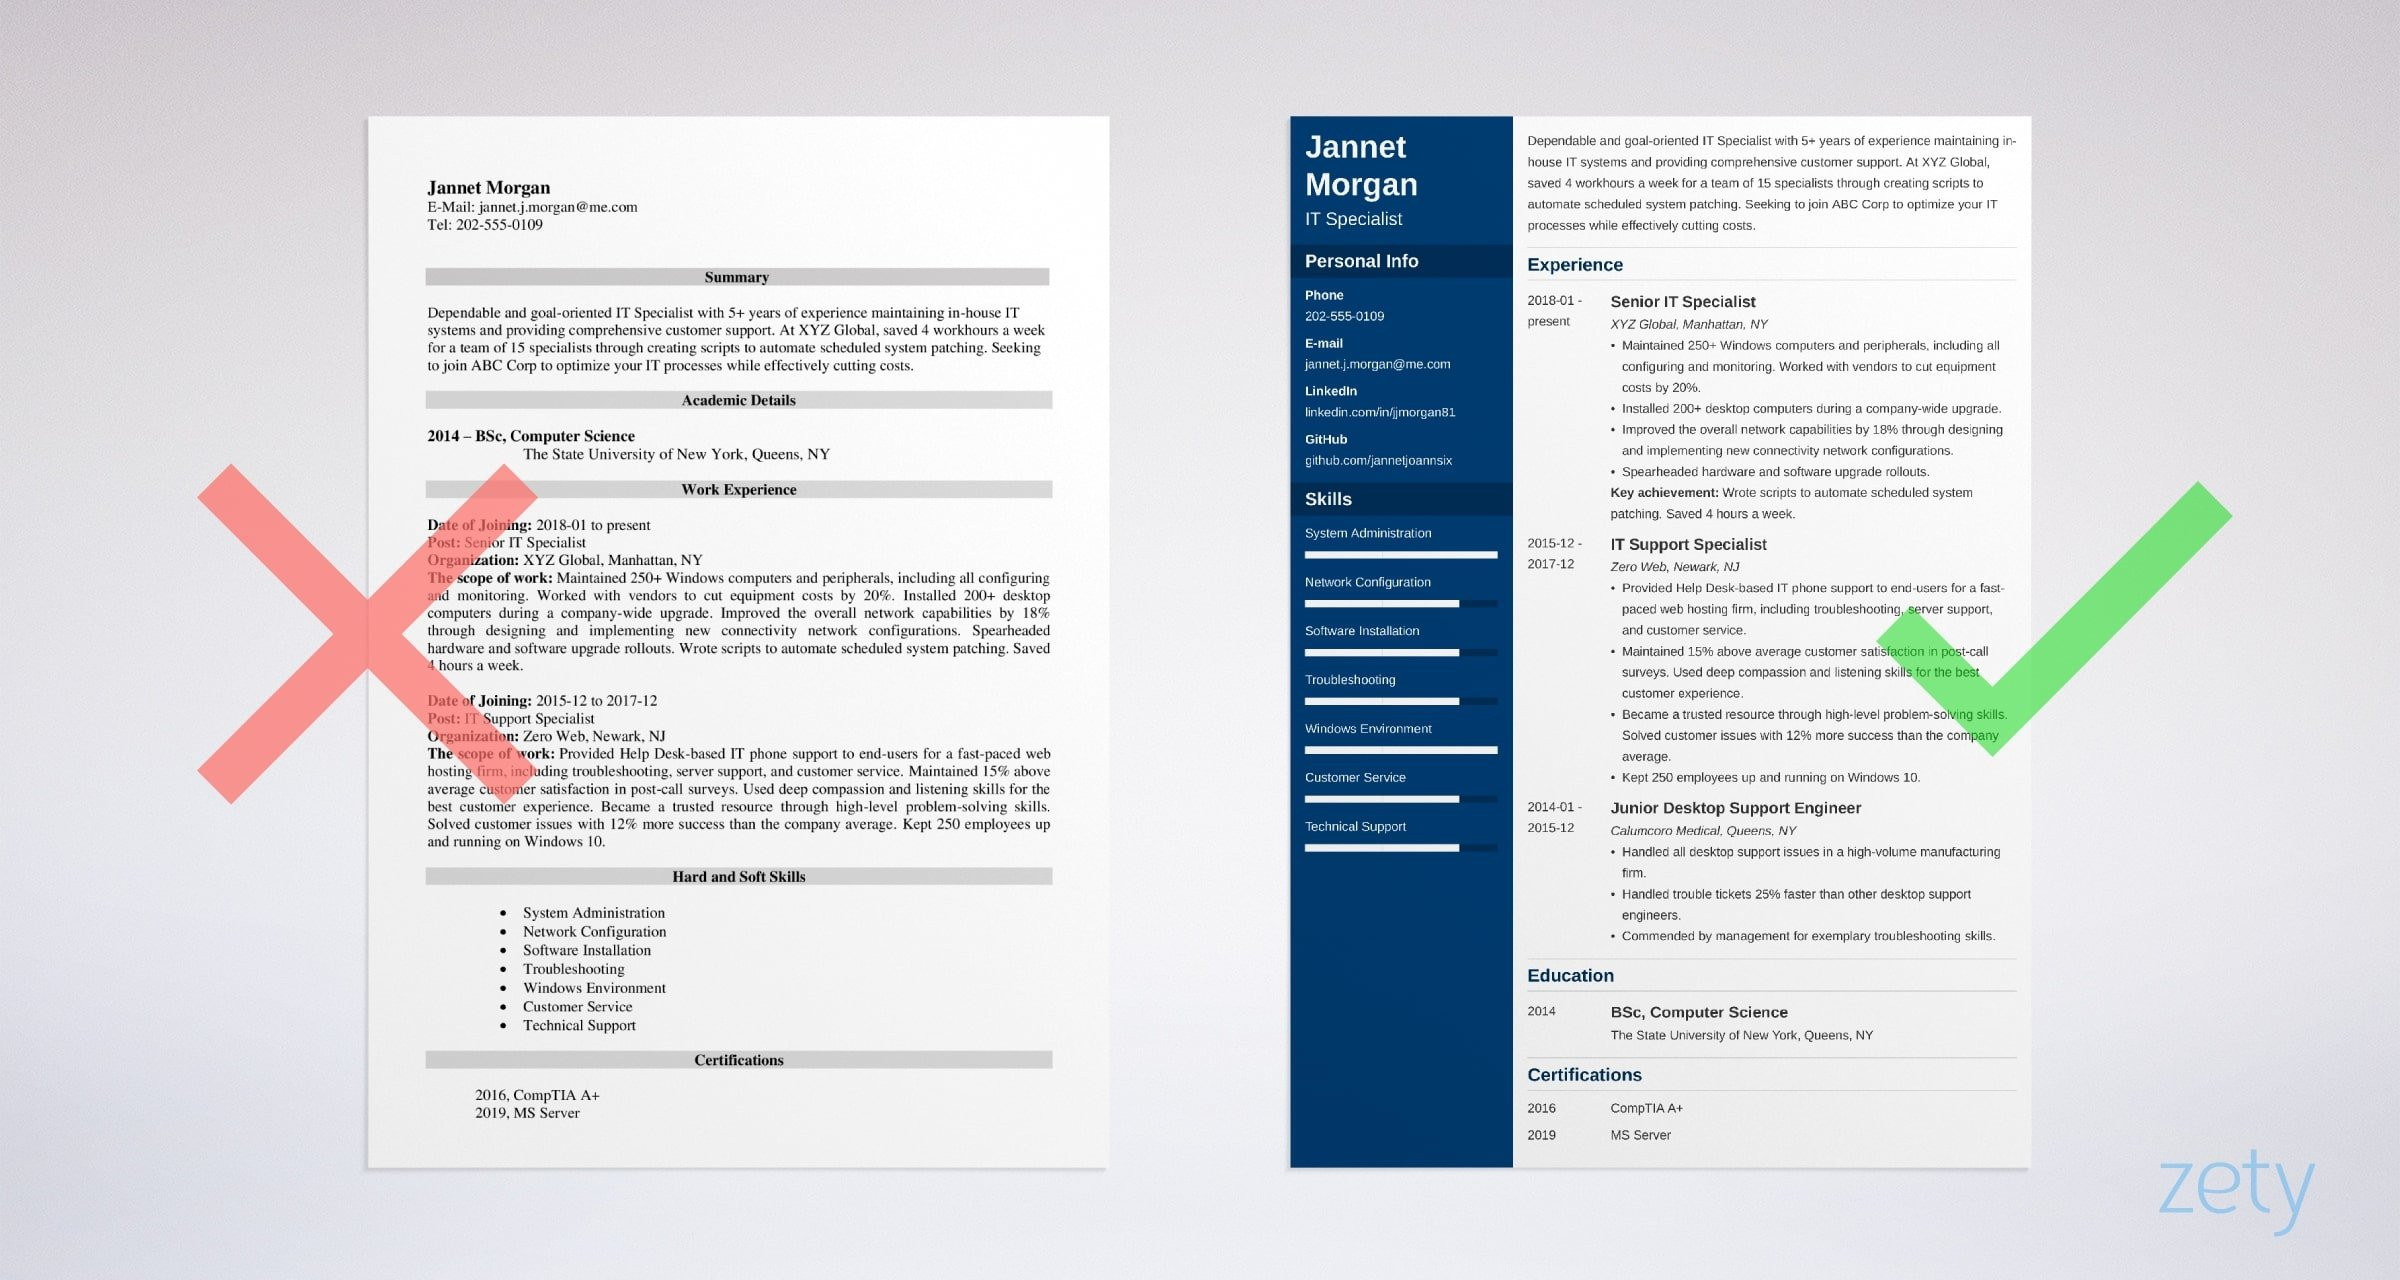 Resume Sample for An It Professional It Specialist Resume Sample (guide & Template)